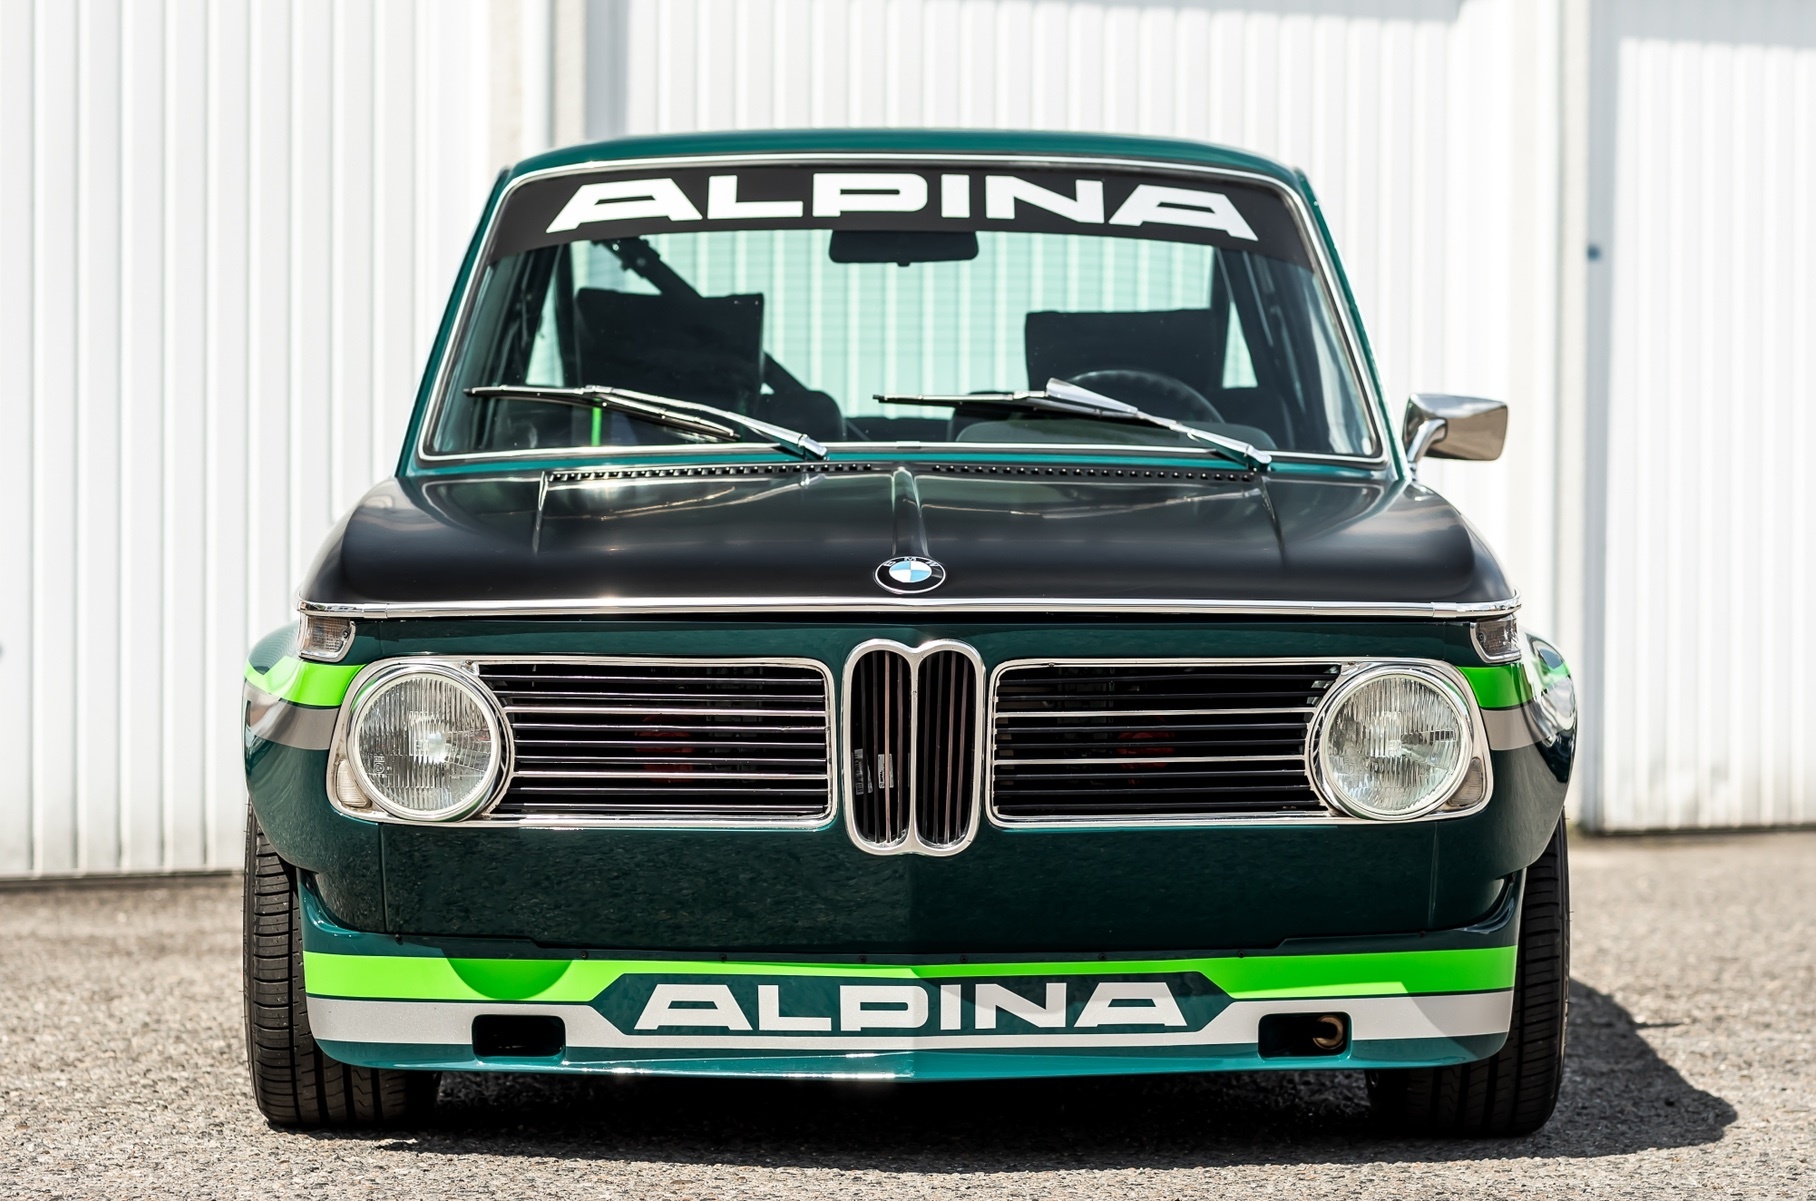 Atelier Manhart restored and improved Alpina 2002 tii from the 70s